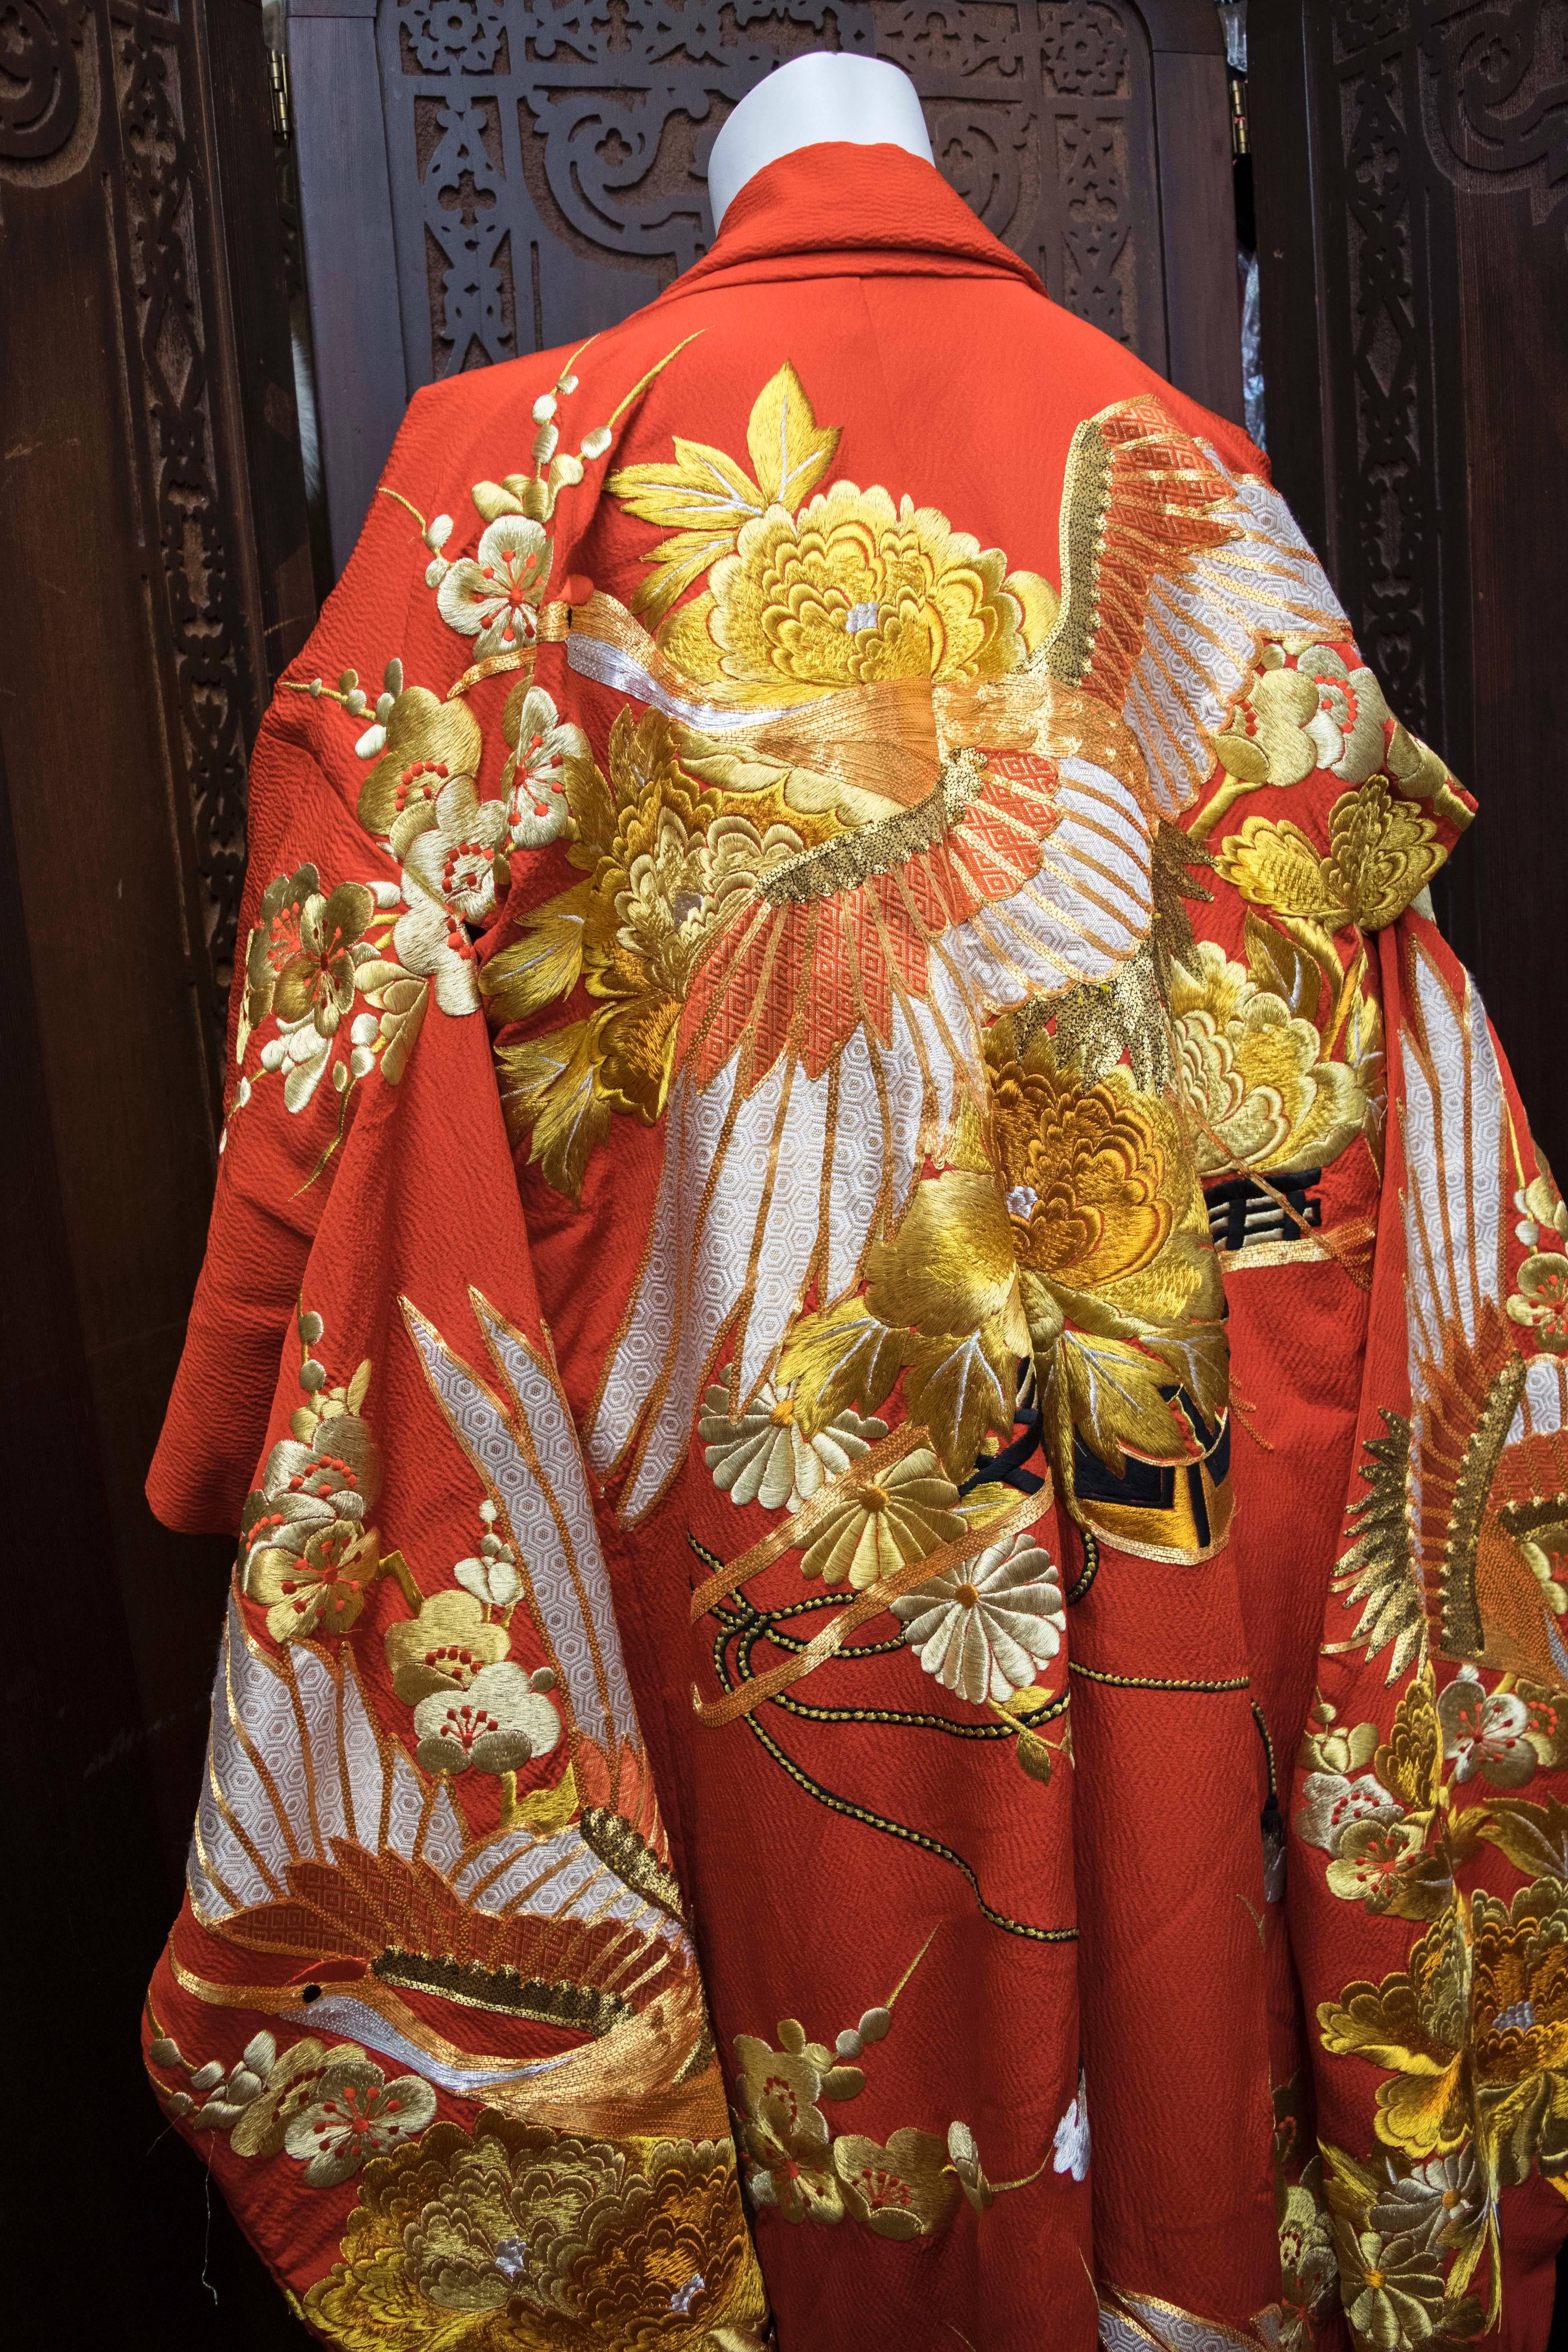 Red and Gold Ceremonial Kimono

The stunning gold embroidery of birds and flowers is beautifully done all over this red kimono. 